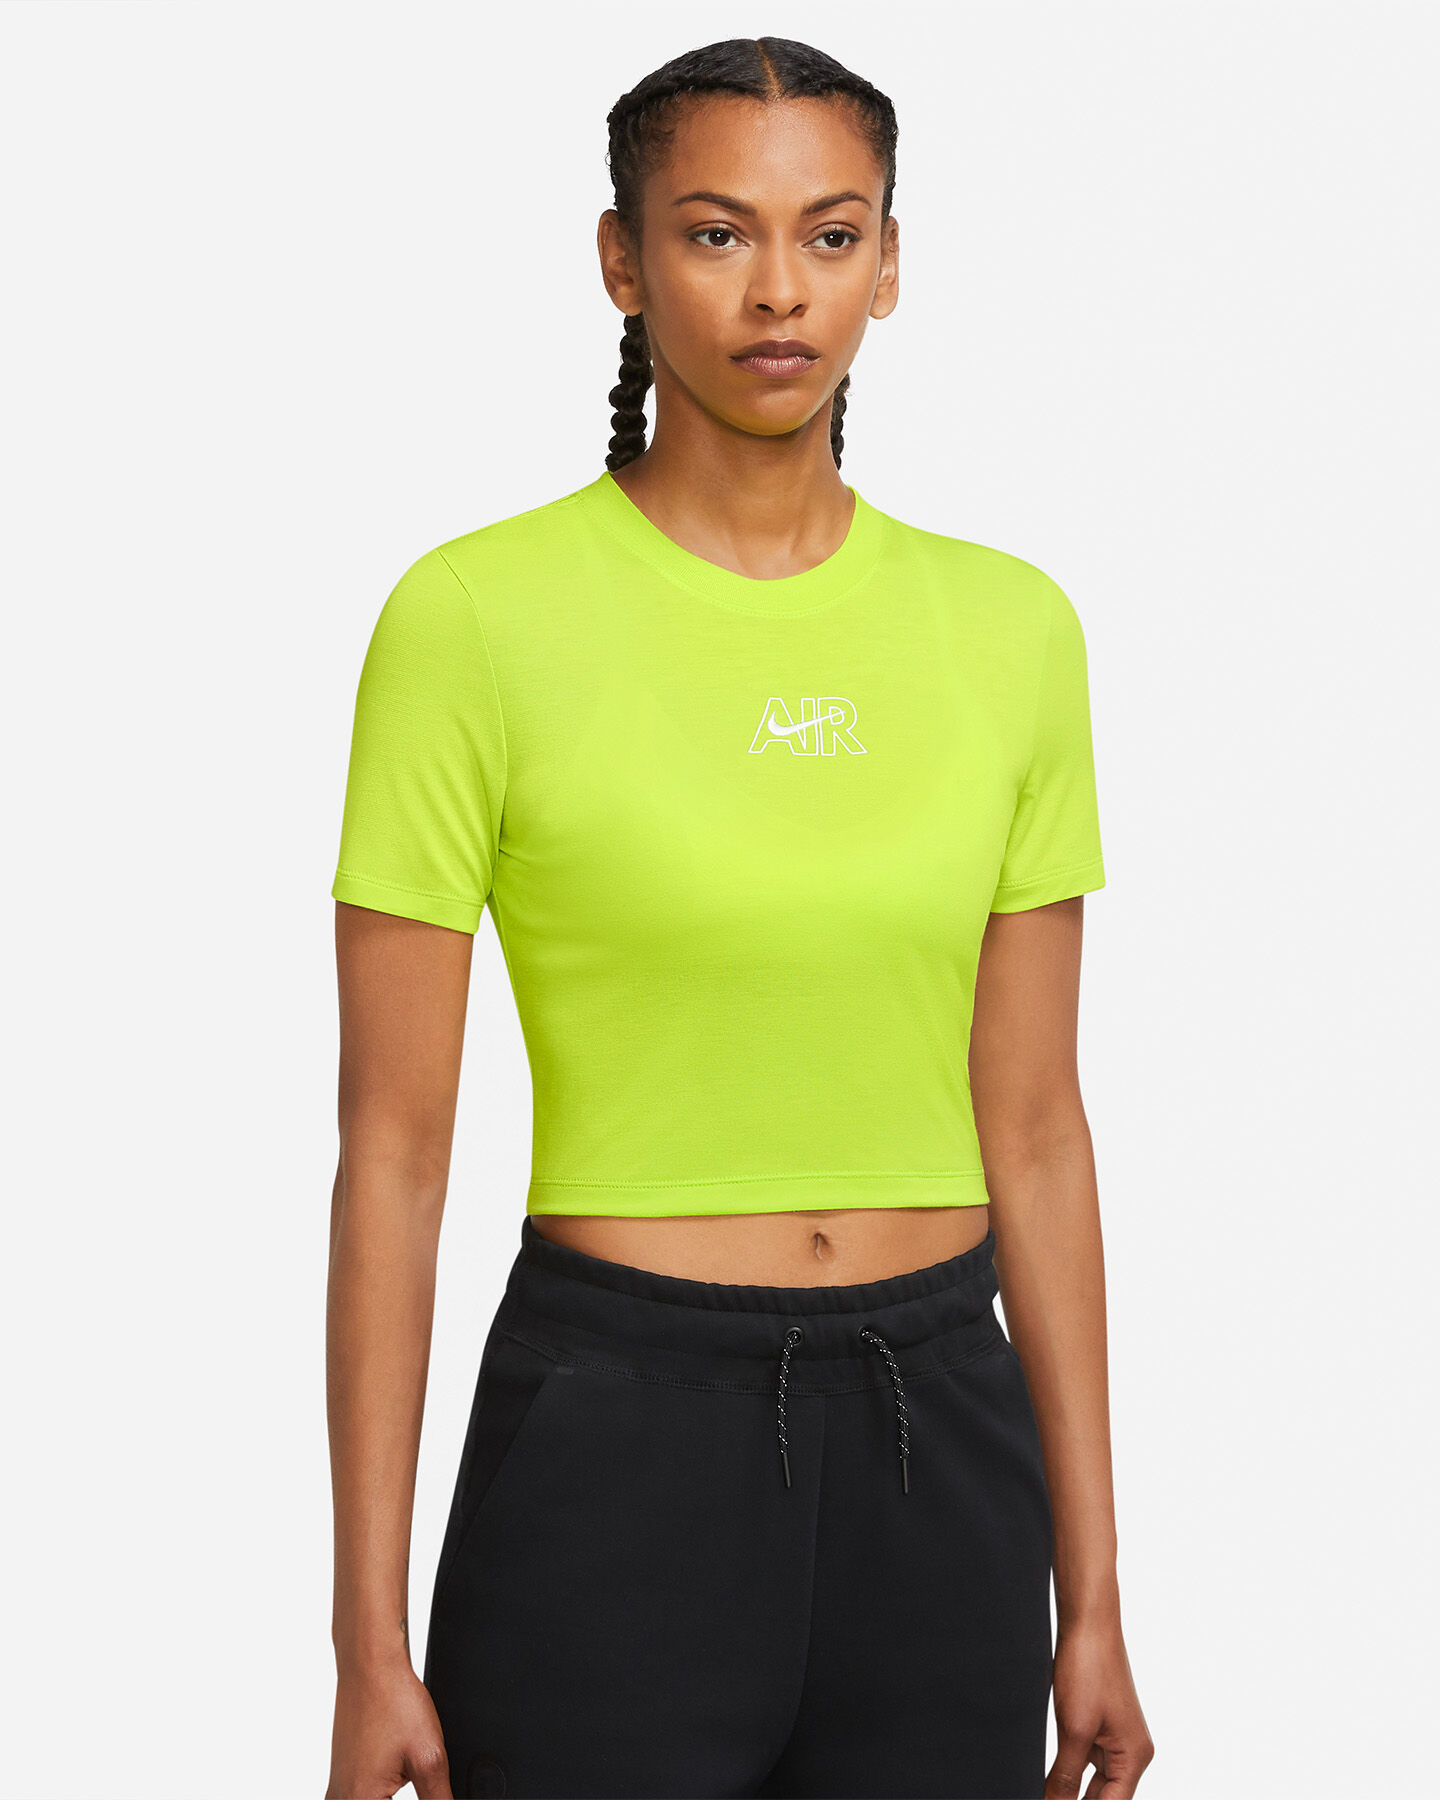  T-Shirt NIKE CROP AIR W S5433801|321|XS scatto 0